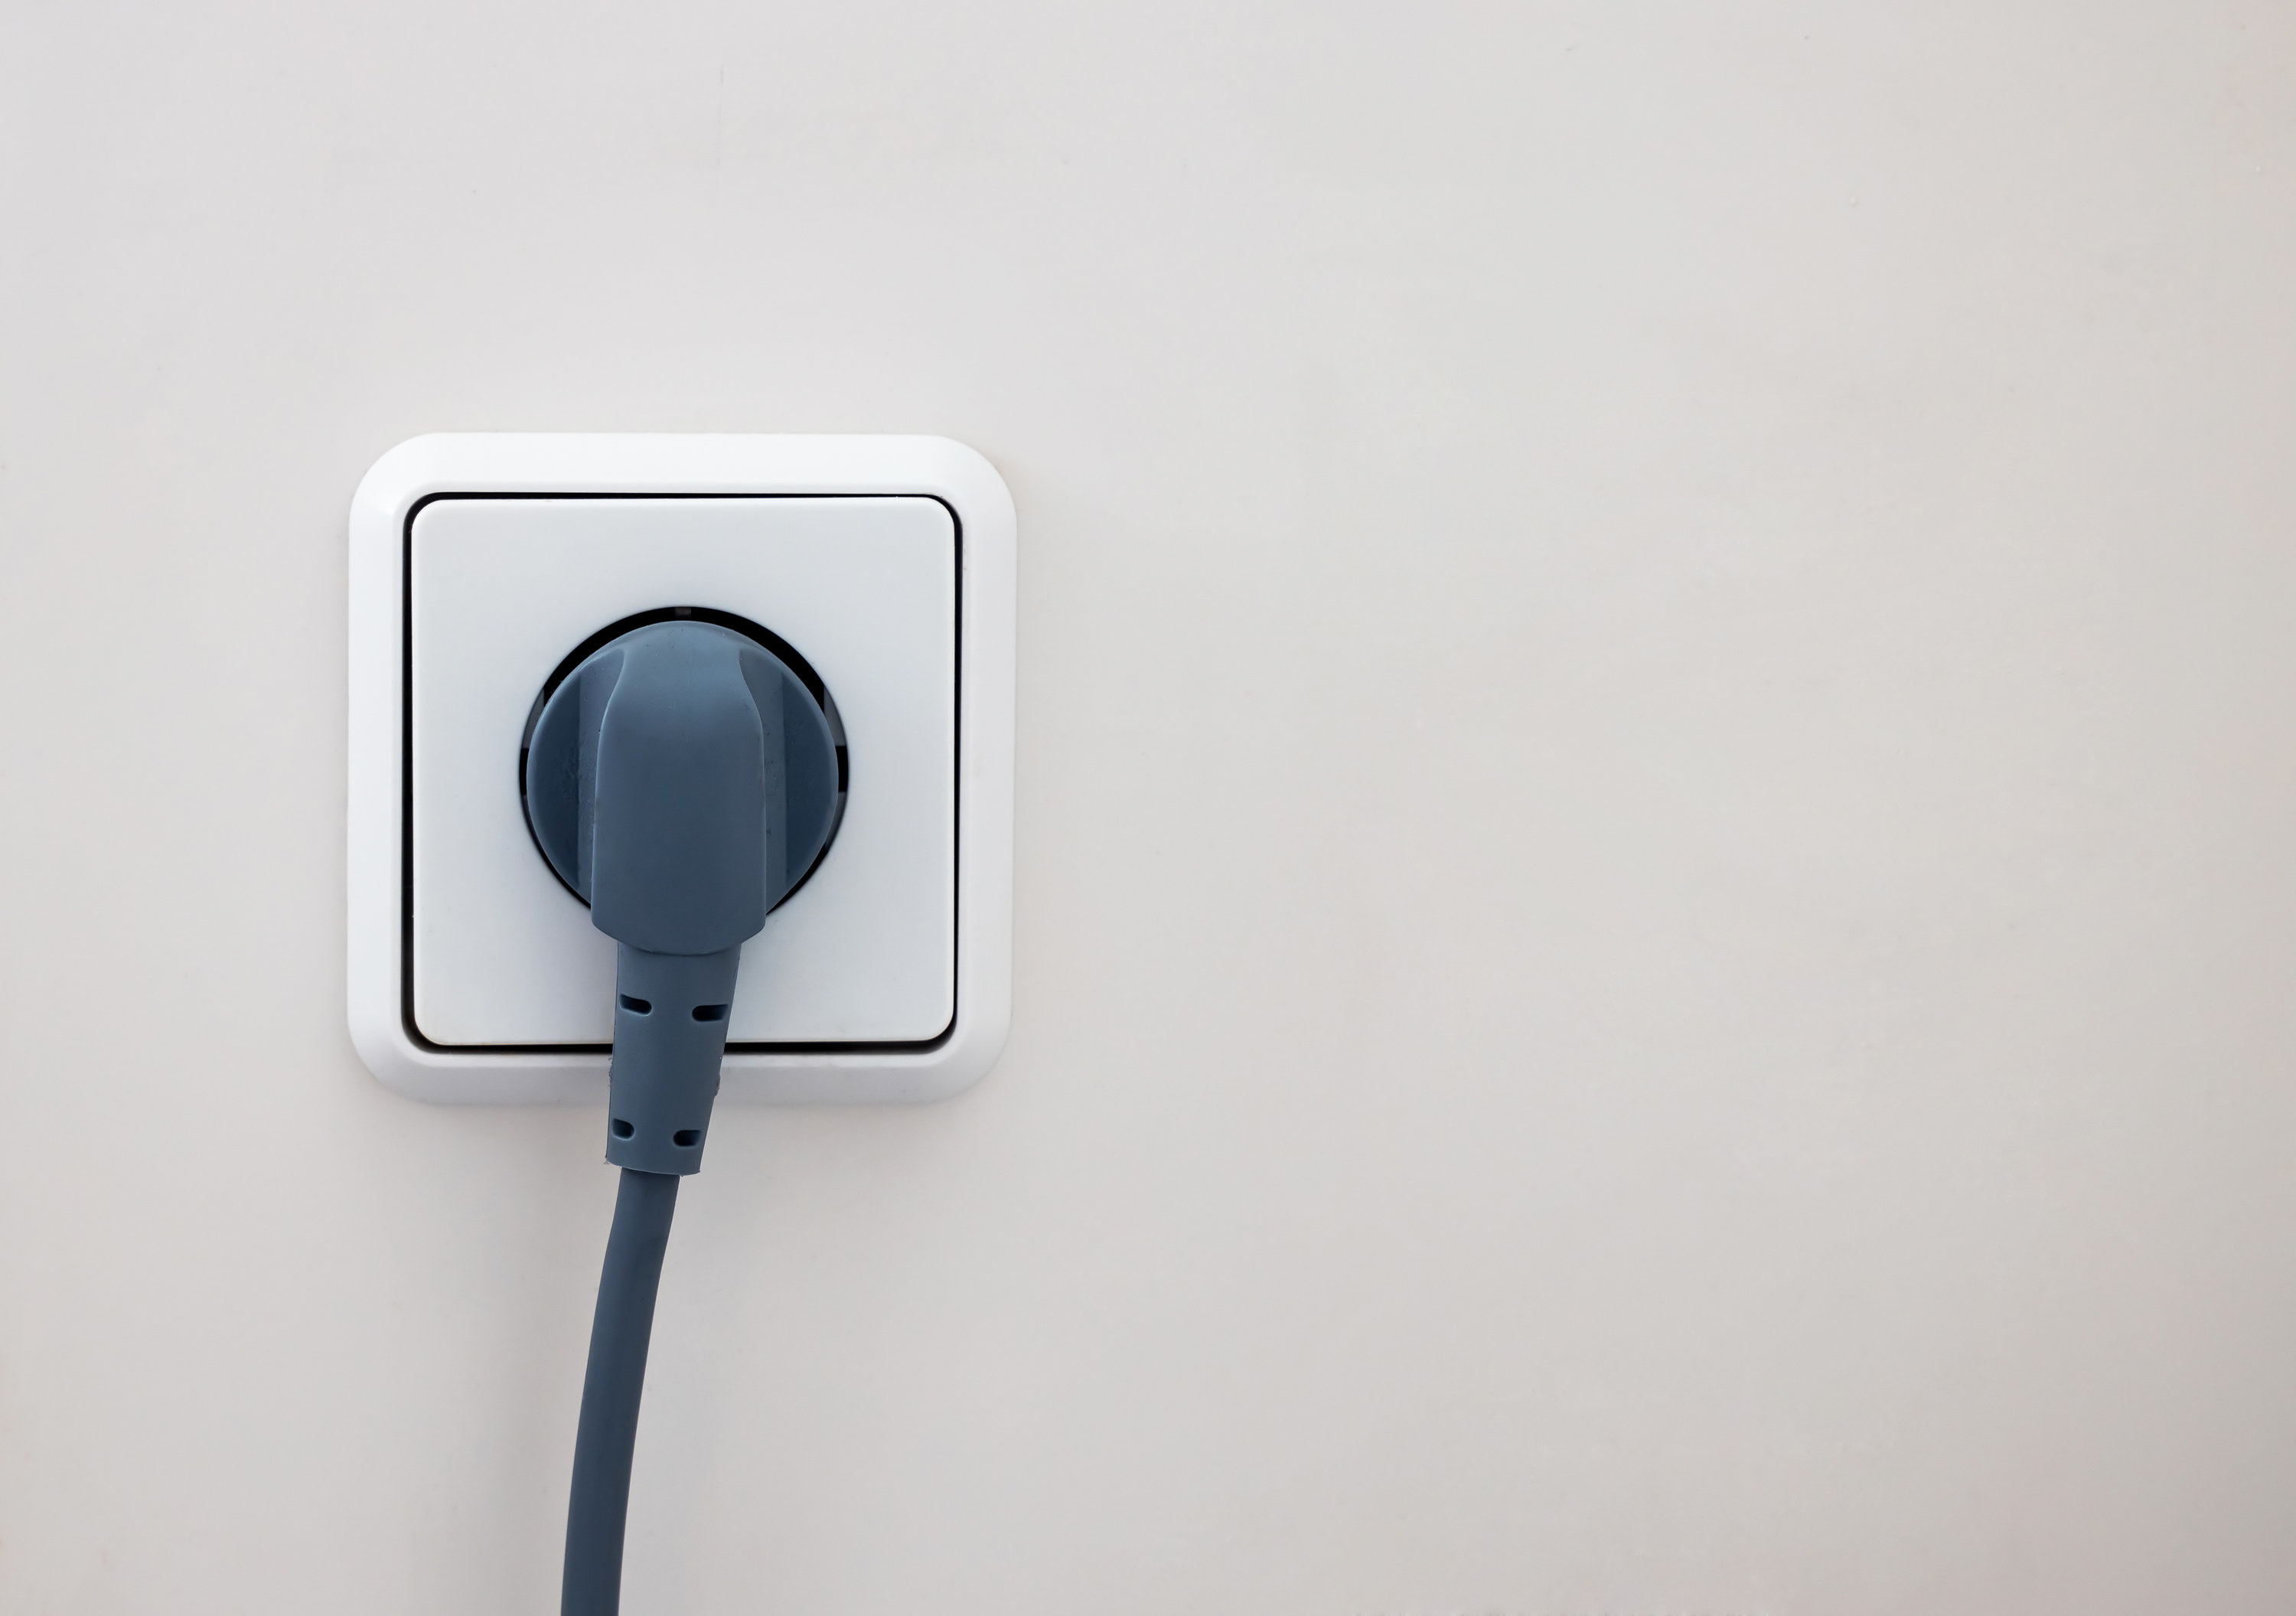 A plug in the wall